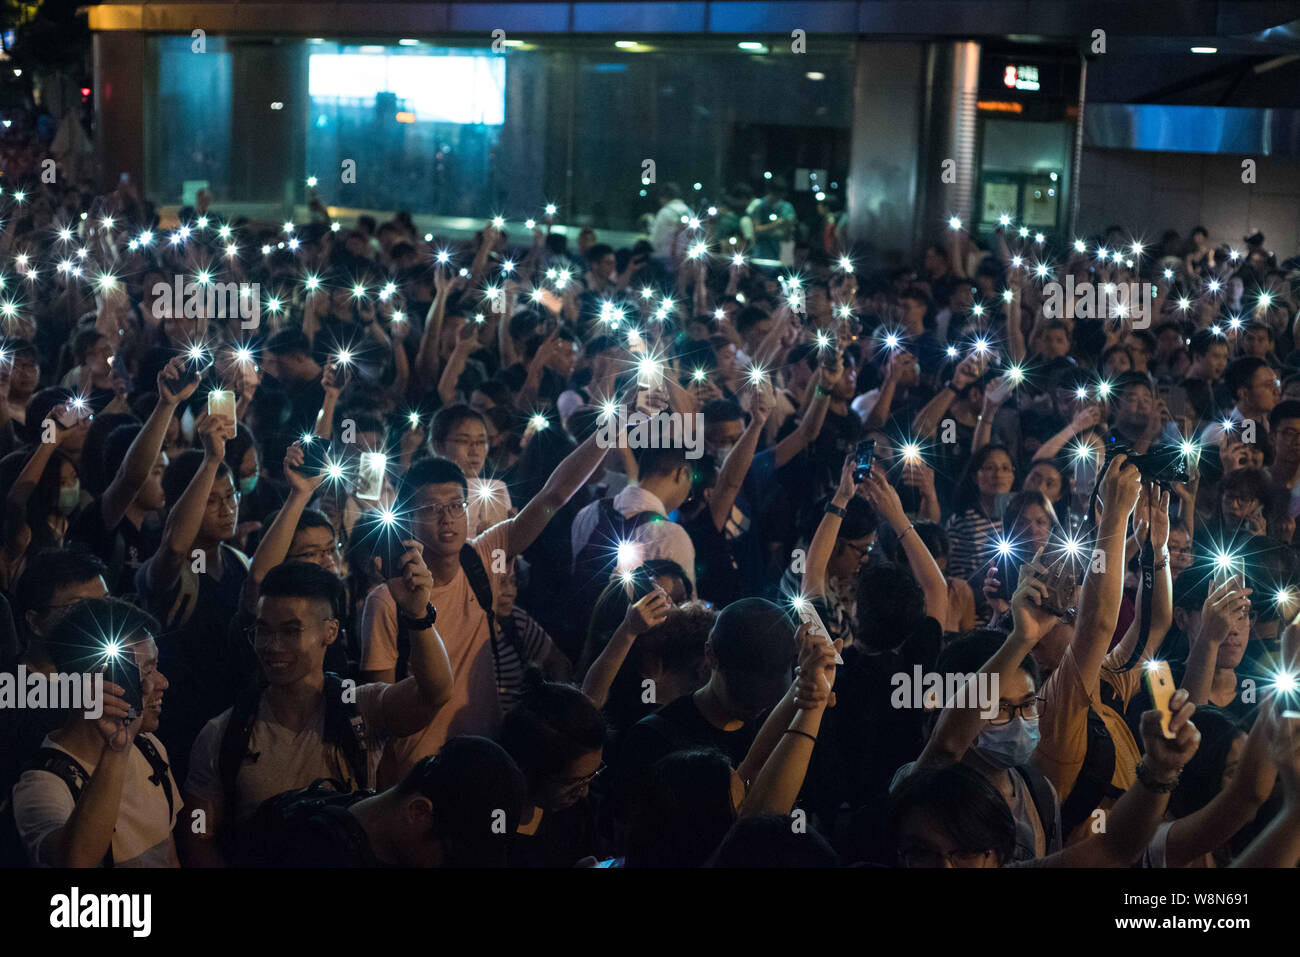 August 2, 2019, Hong Kong, Hong Kong: Participants at the civil workers rally illuminate the night with their phone lights during the protest..Protesters are out in the streets fighting for their ''5 Demands'' of the Hong Kong government, with the main demand being the full withdrawal of the controversial extradition bill. Other demands include an independent investigation into police operations and the resignation of Carrie Lam, Hong Kong's Chief Executive. (Credit Image: © Aidan Marzo/SOPA Images via ZUMA Wire) Stock Photo